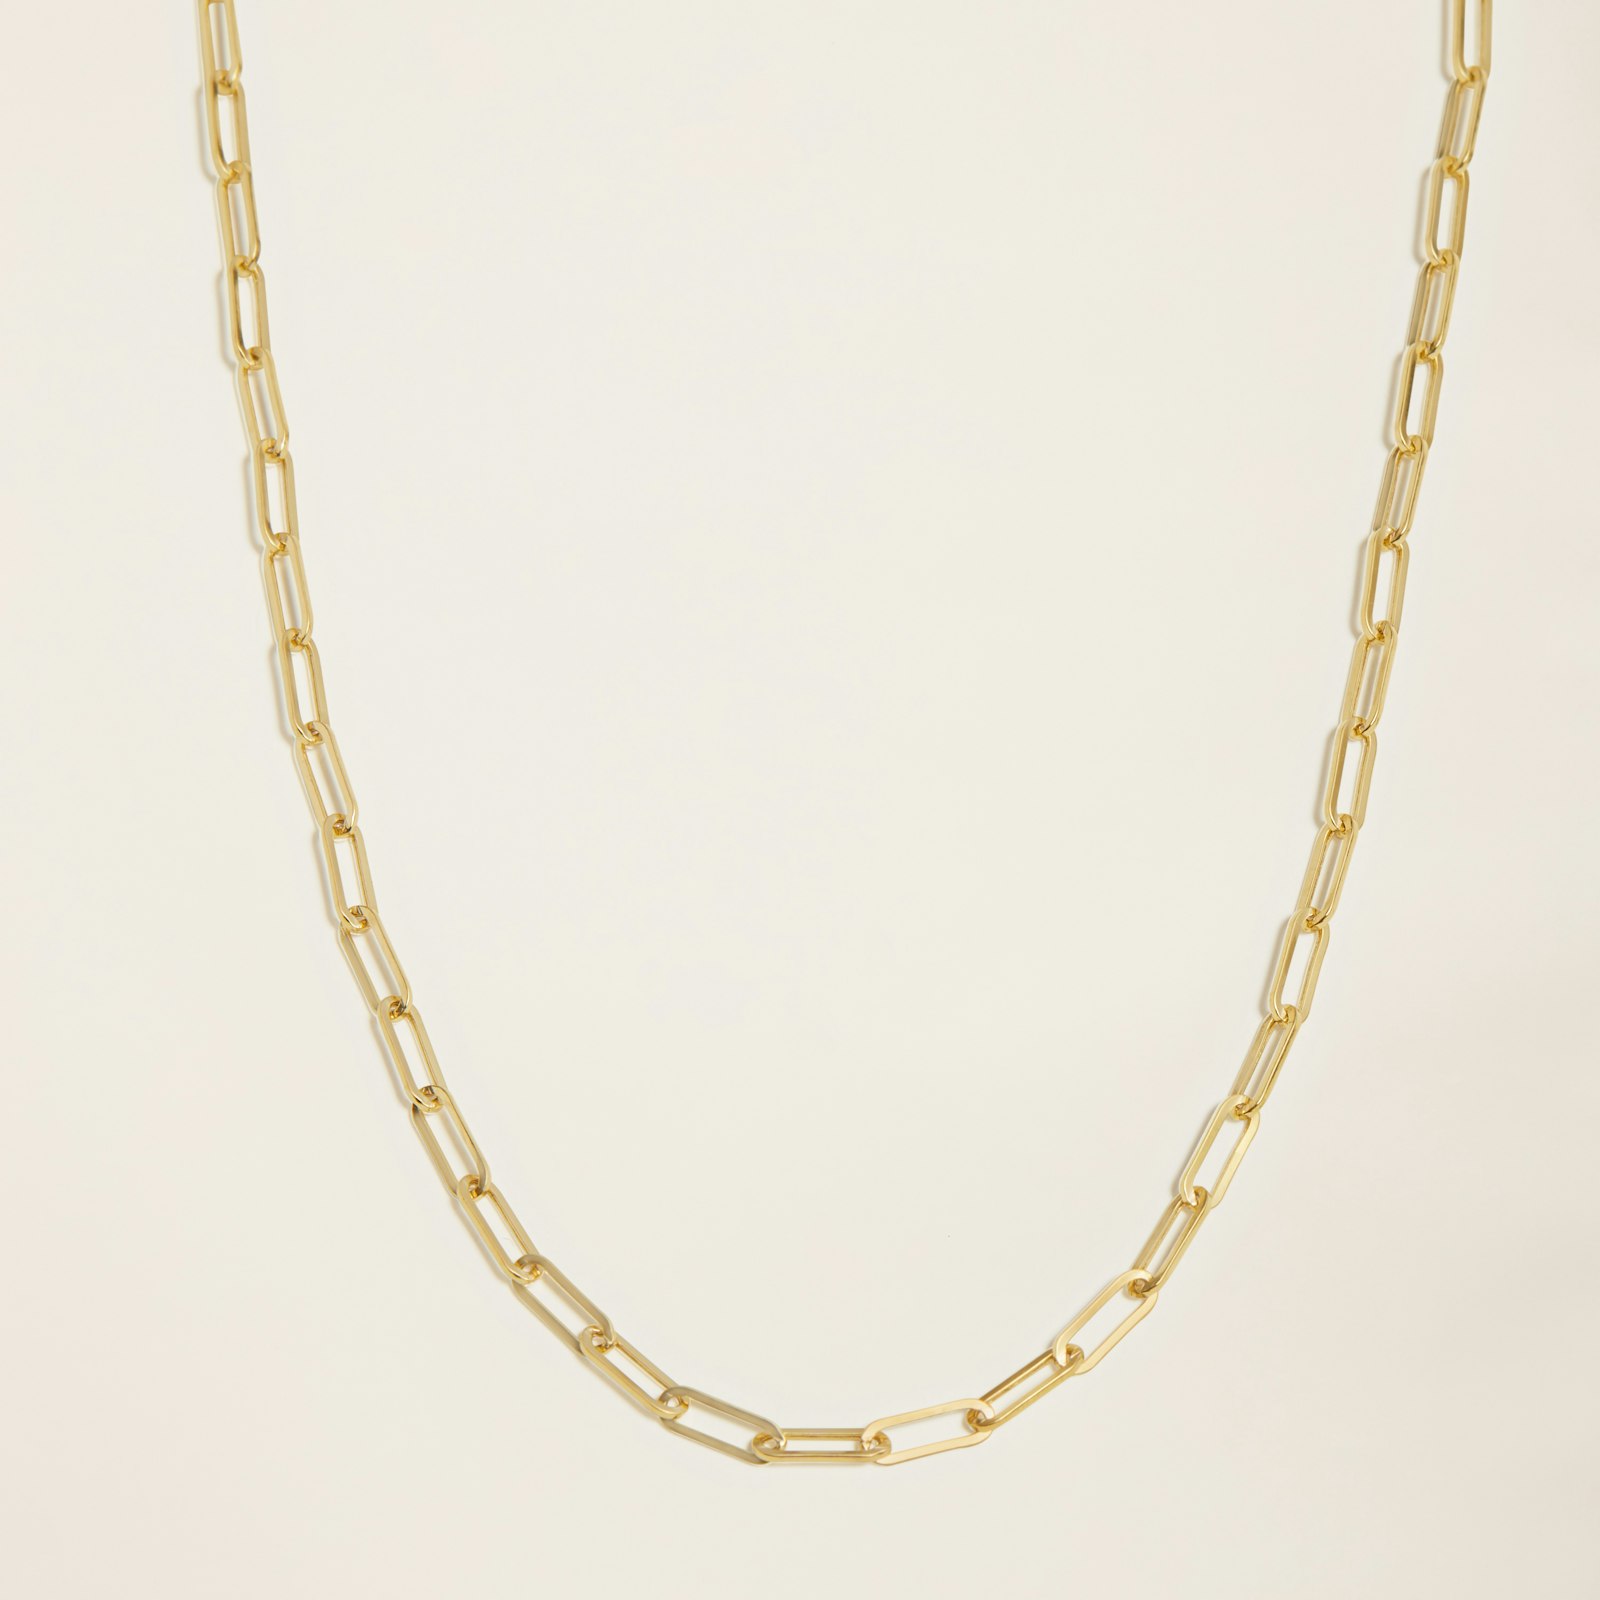 14K Gold Paperclip Chain Necklace - 16__A_6366_Edited.jpg